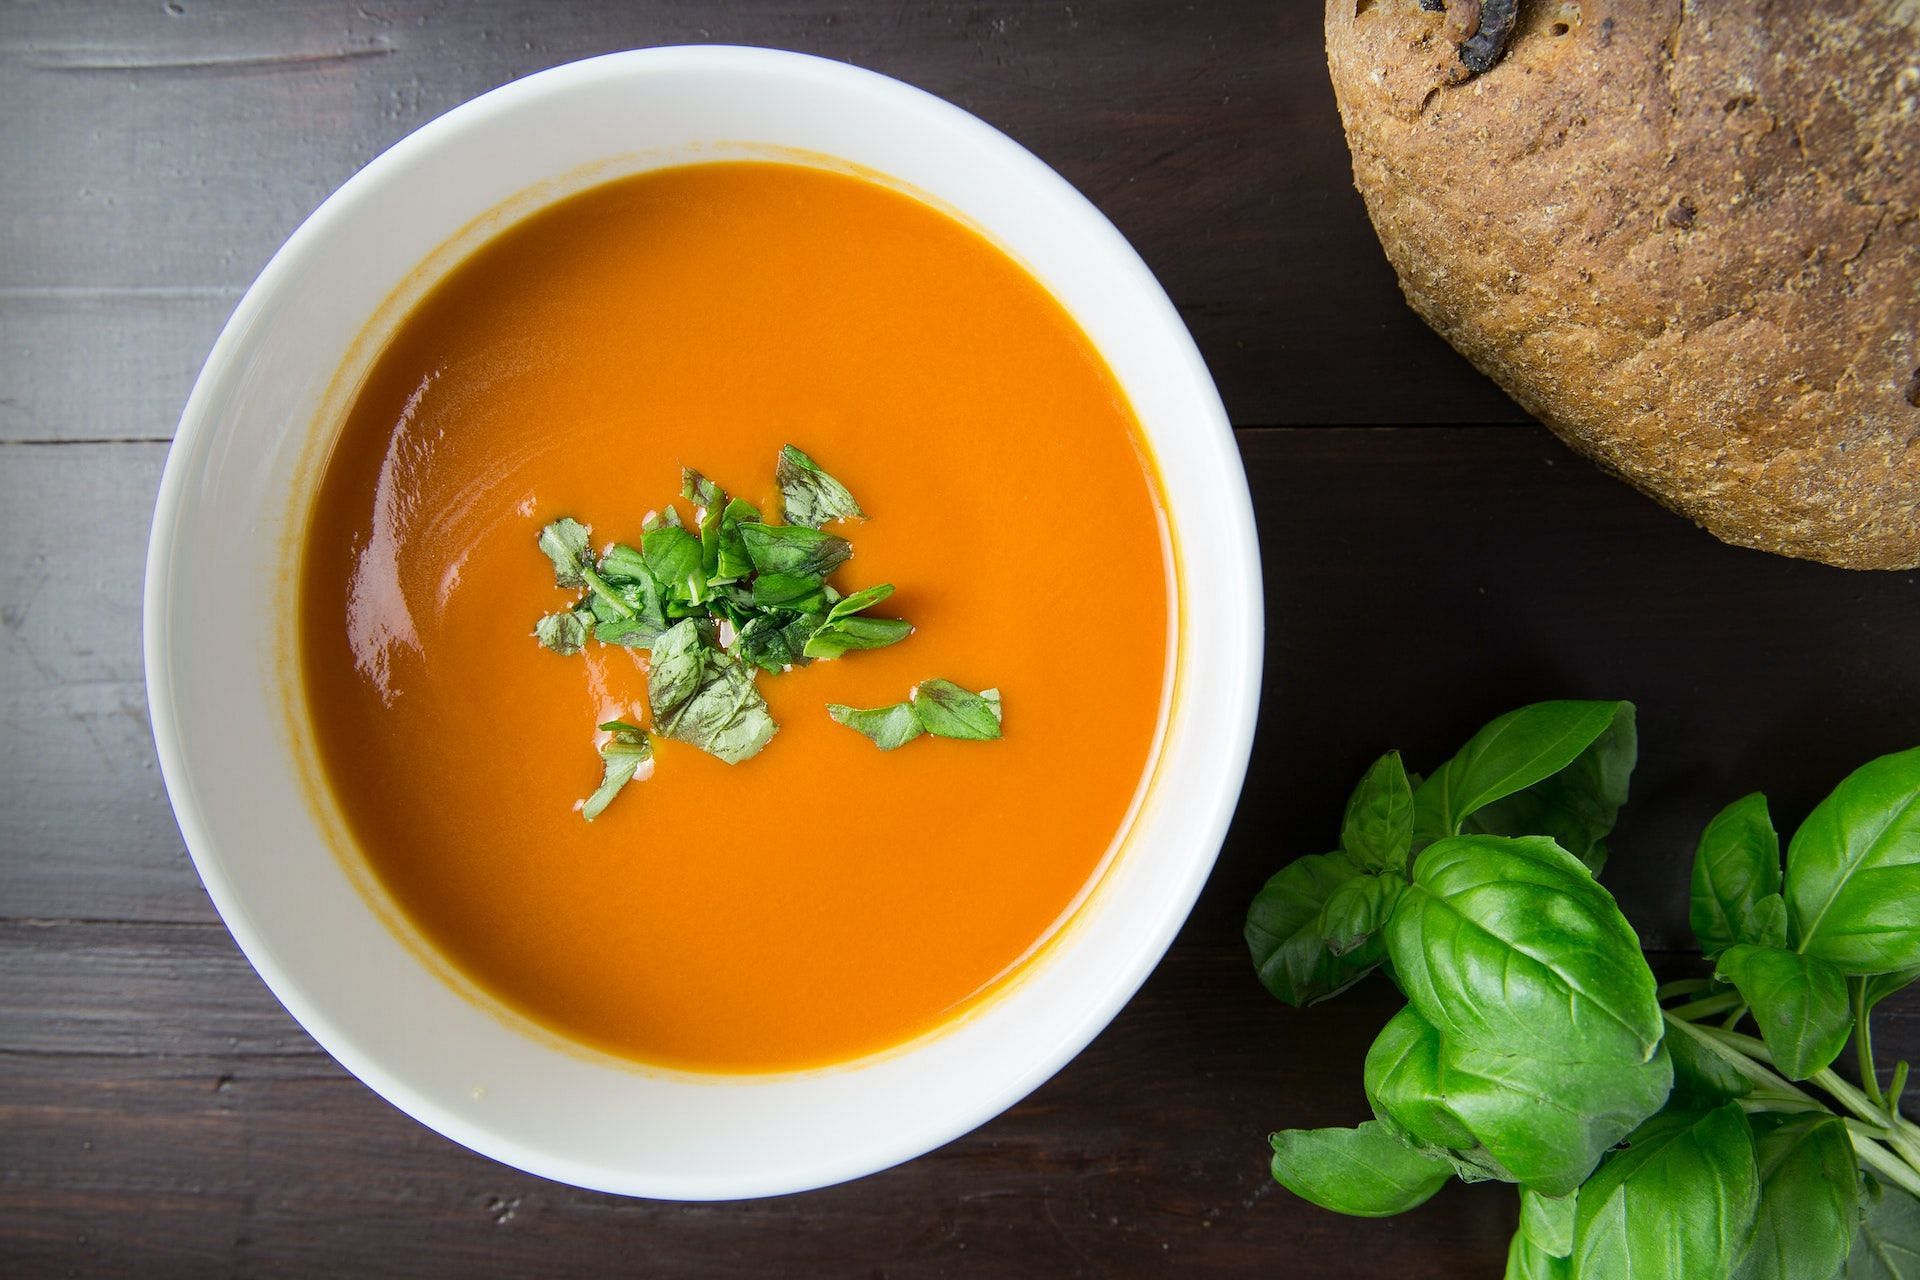 Soups and broths are good foods for sore throat. (Photo via Pexels/Foodie Factor)